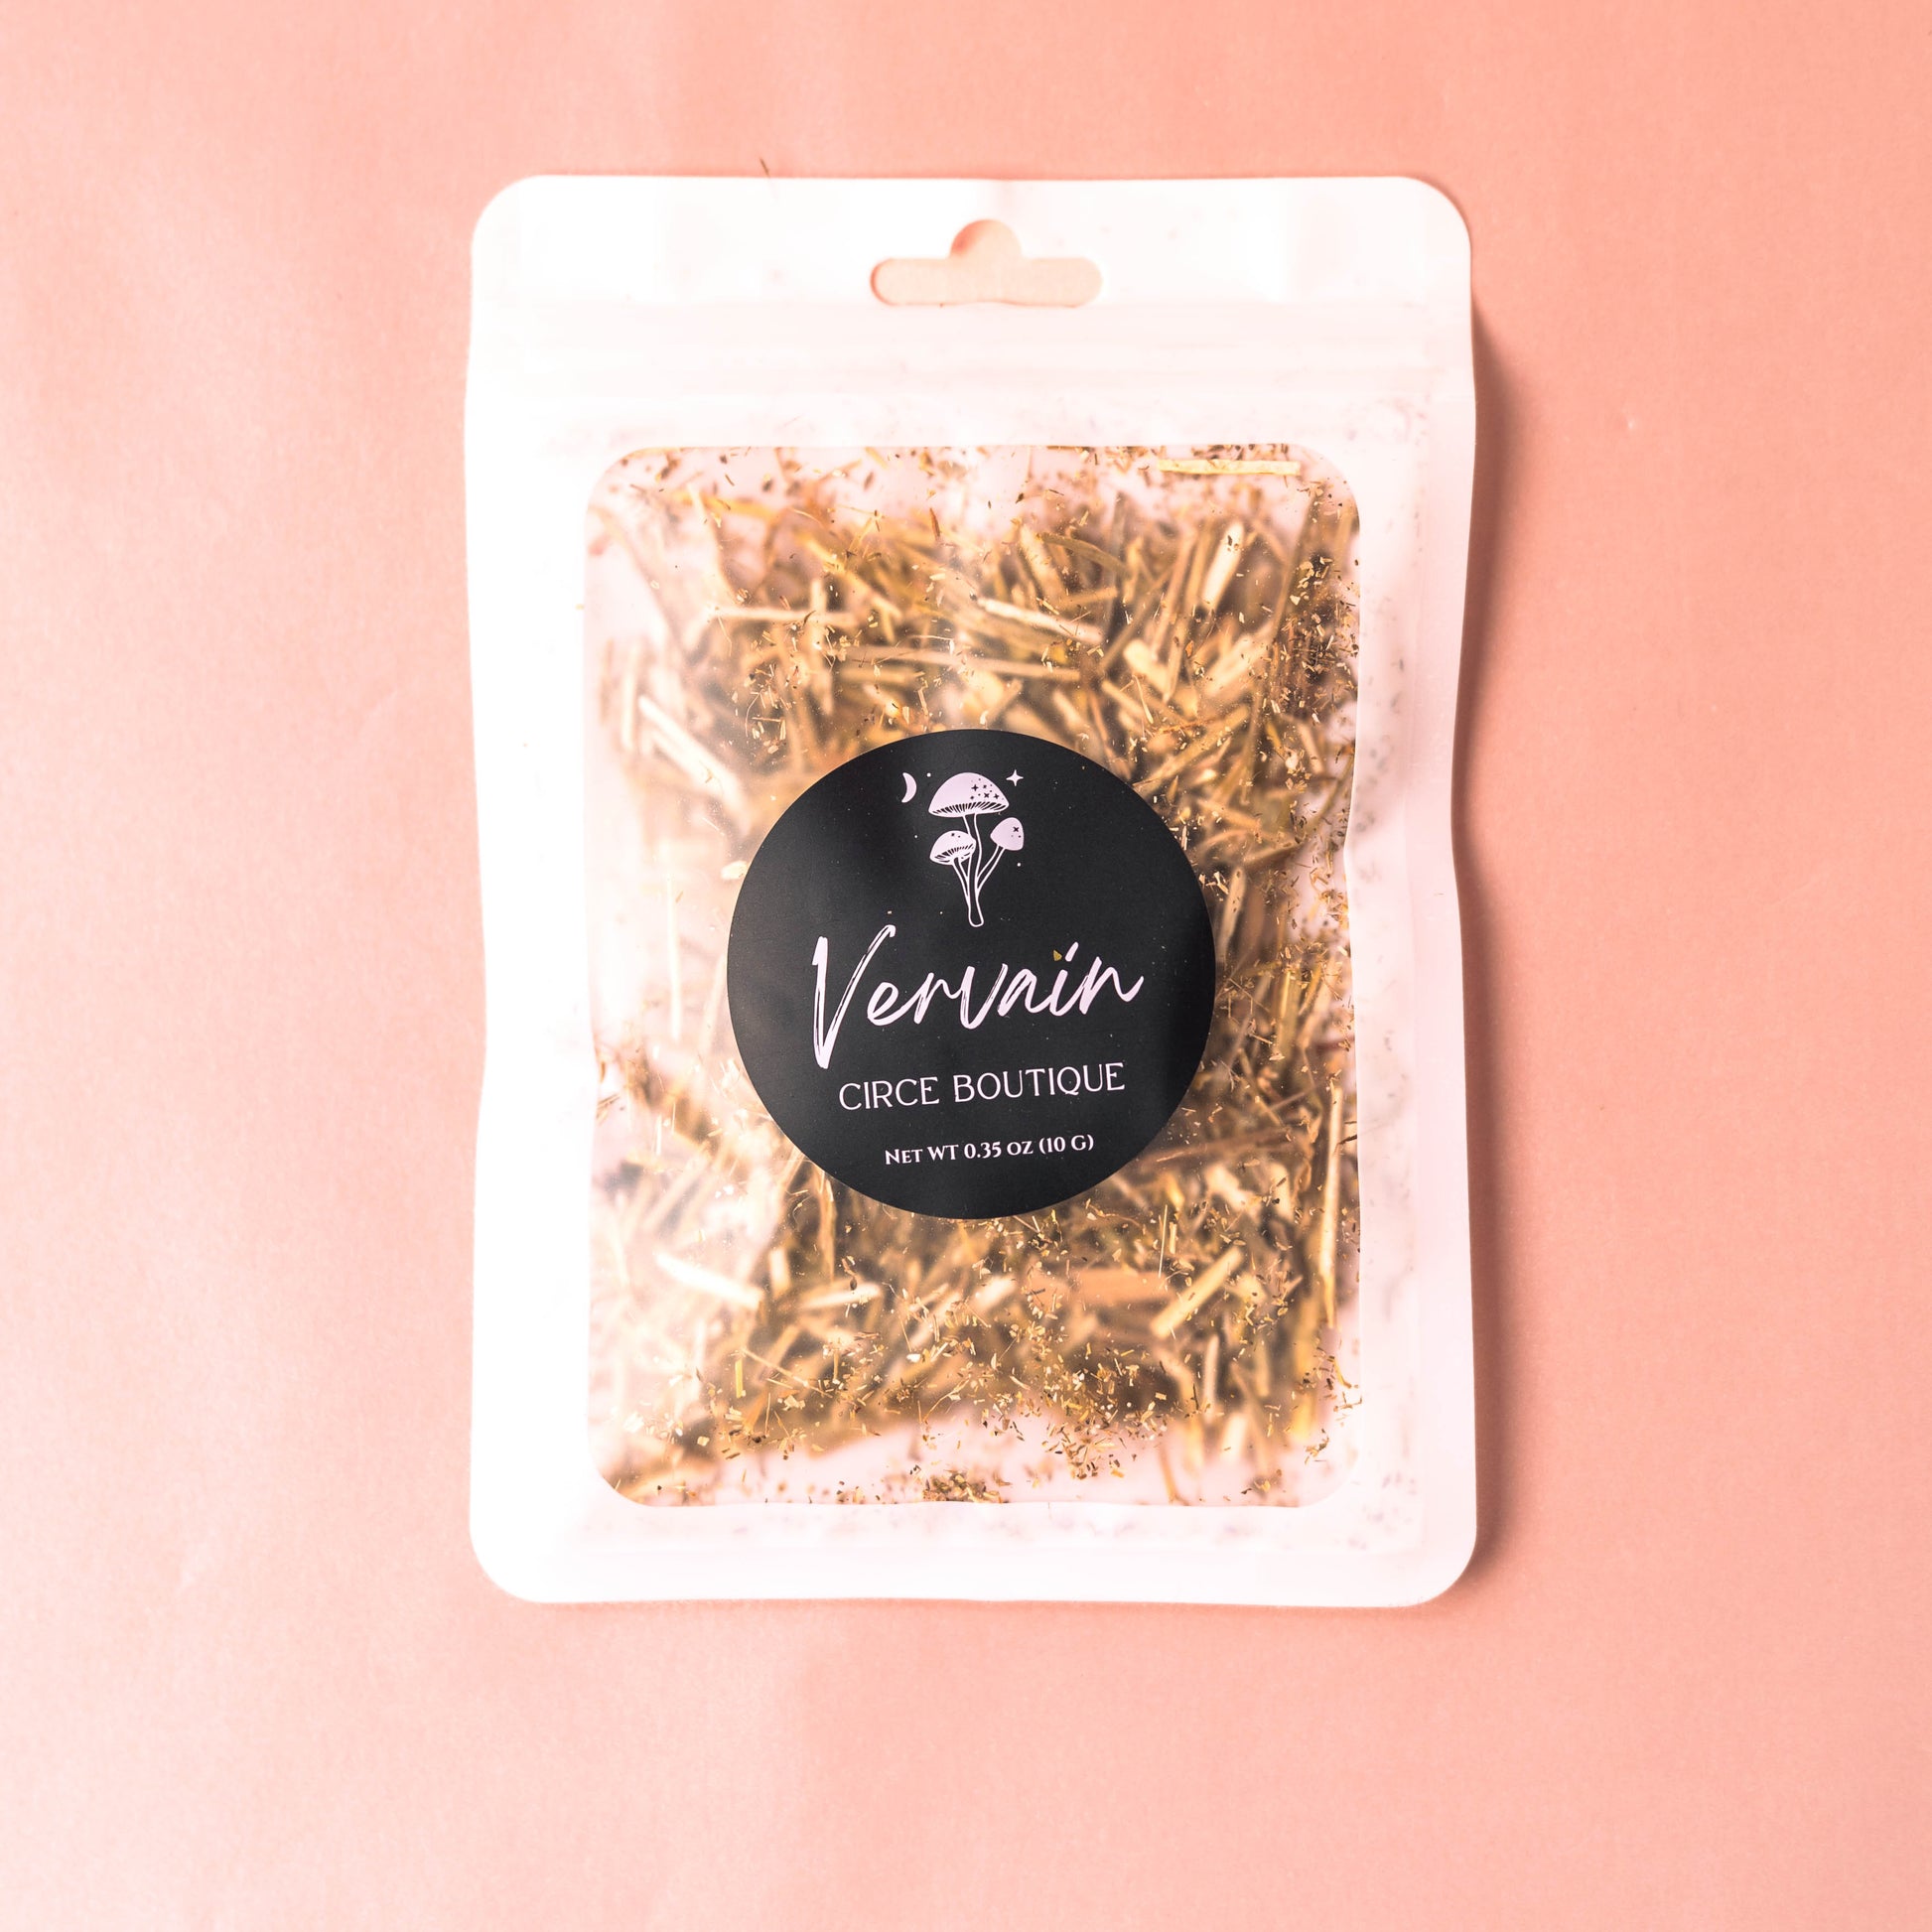 CIRCE Vervain .35 oz. - Herbs  from CirceBoutique